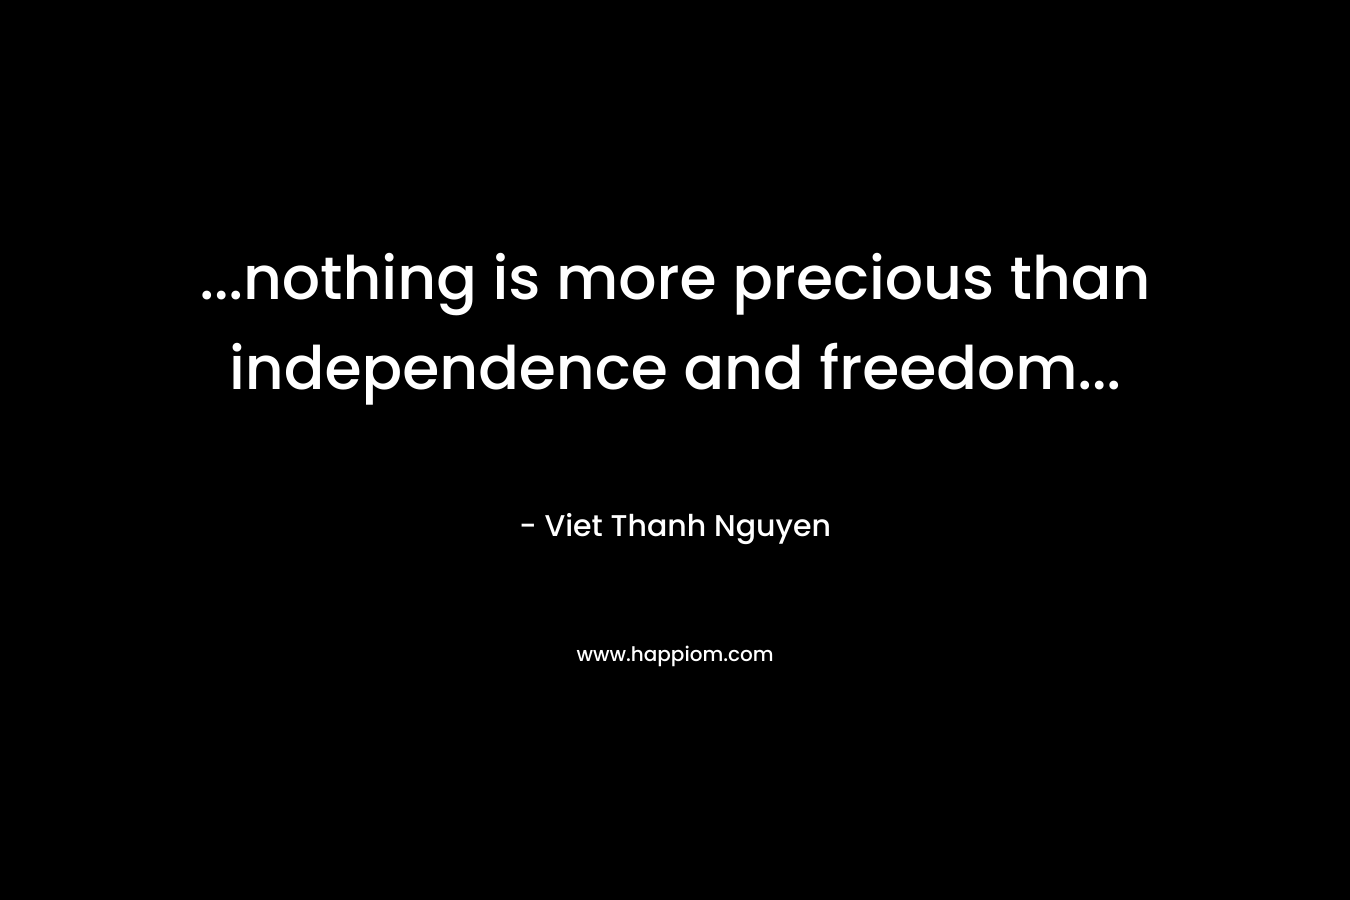 ...nothing is more precious than independence and freedom...